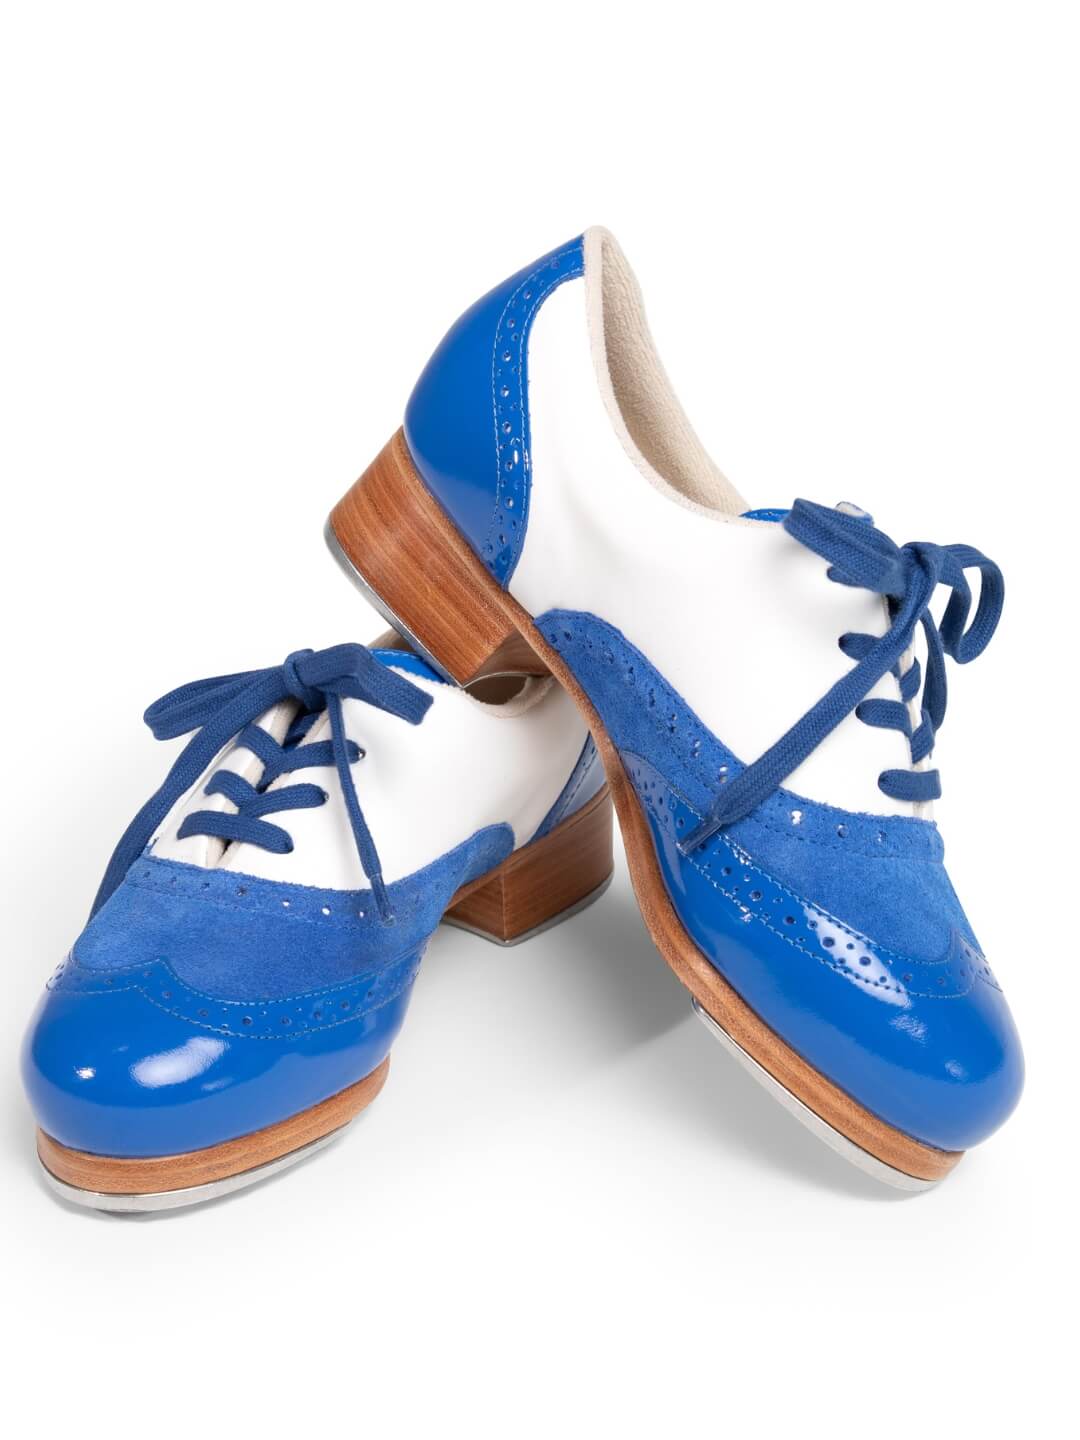 LIMITED Edition - Capezio Roxy Tap Shoe 960 Fashion colors 960F - BLUE and  WHITE - Available after 1 November 2023